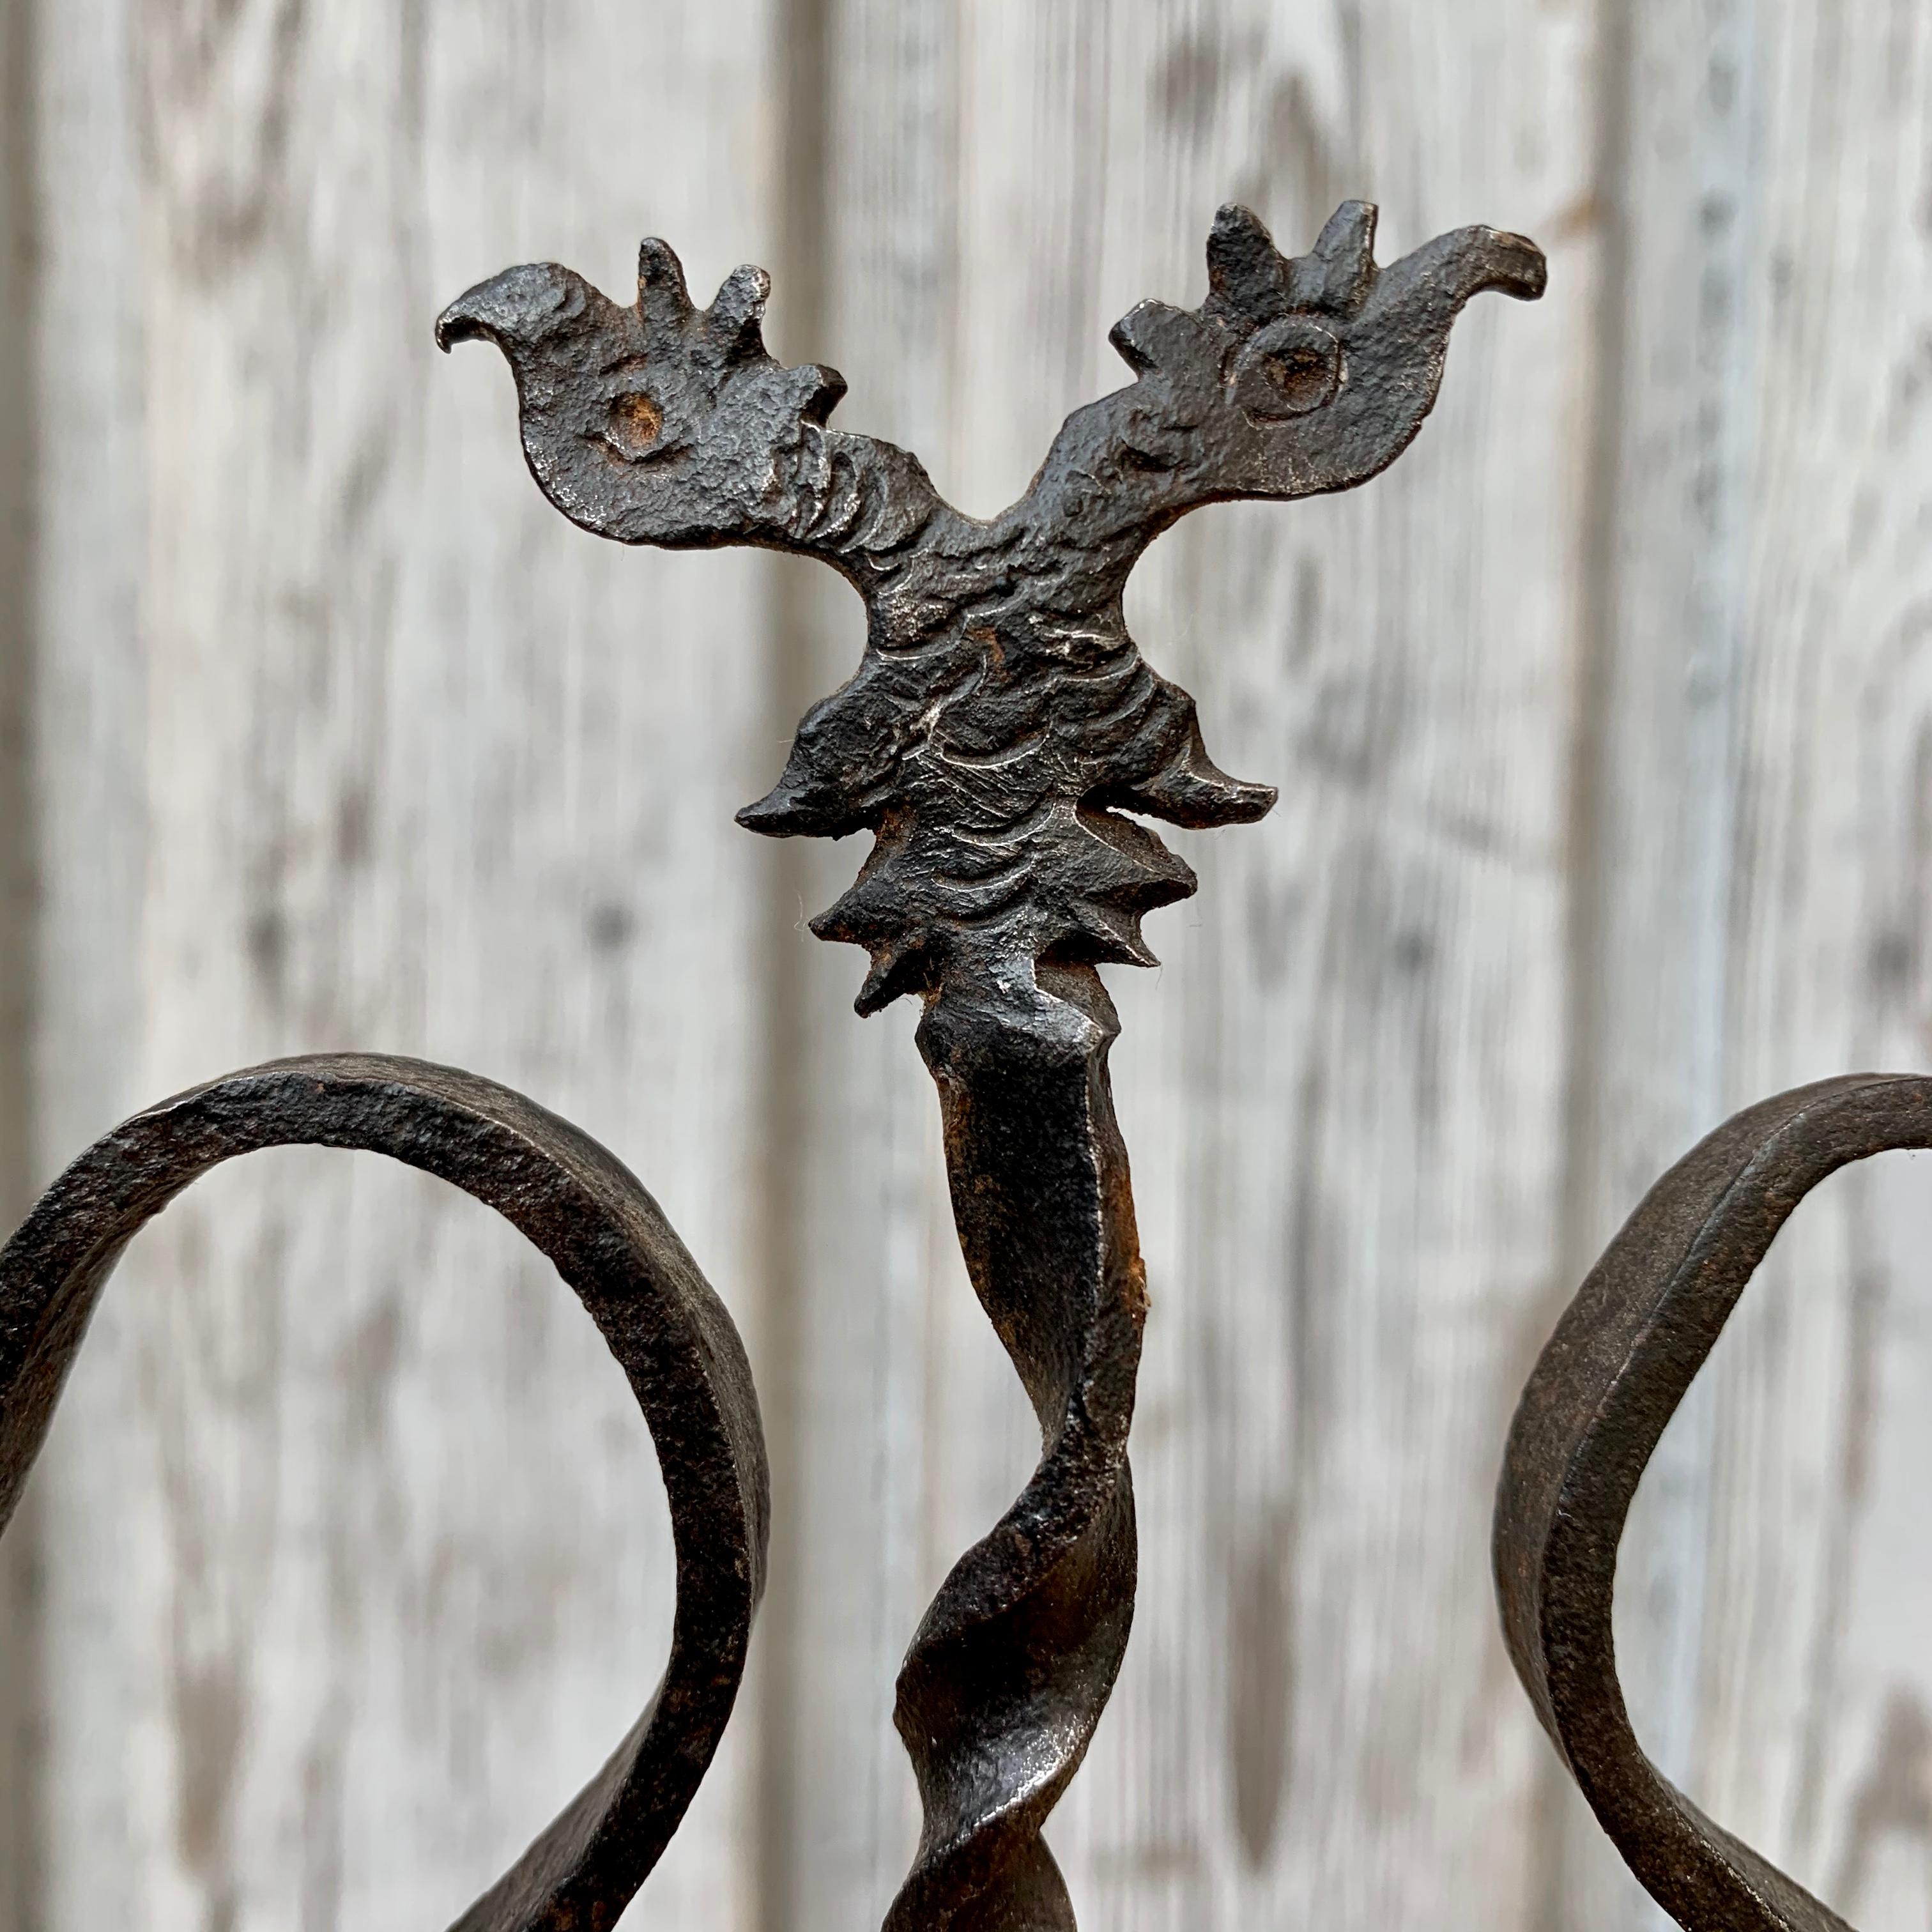 Austrian 18th Century Iron Weather-Vane with European Eagle Emblem on Wooden Stand